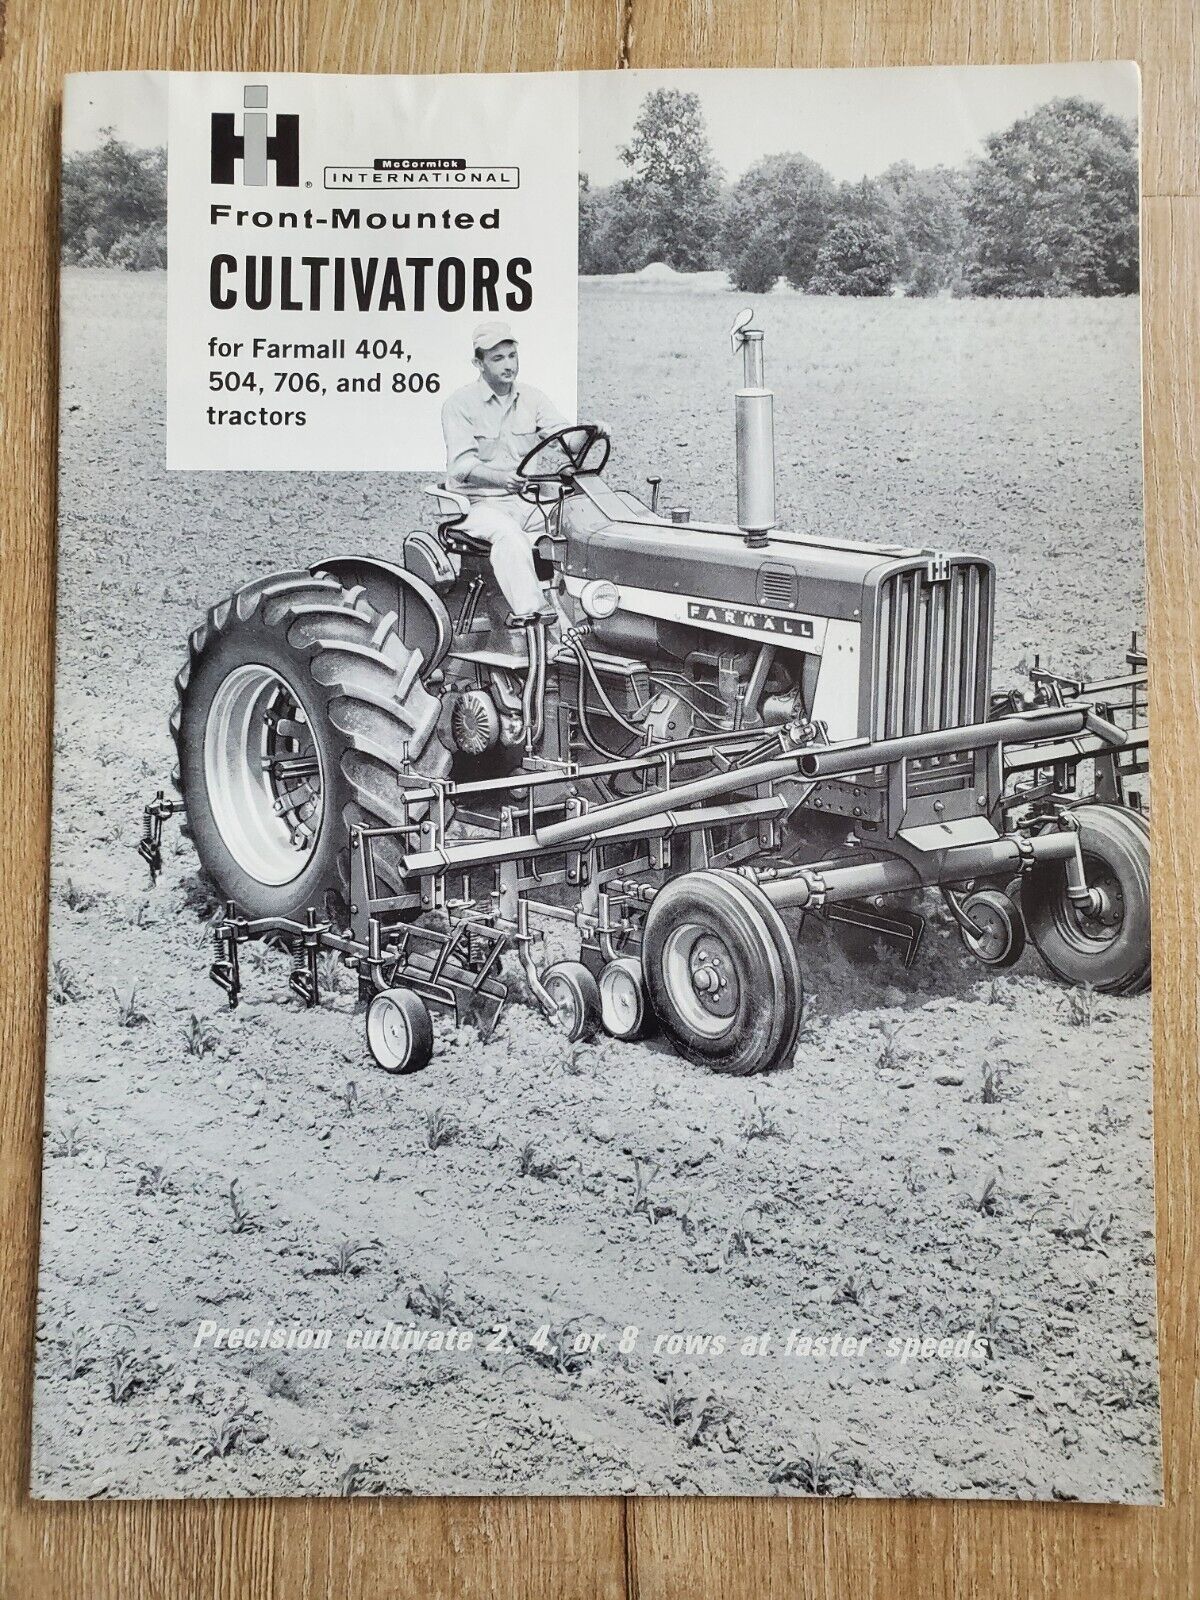 IH McCormick Front-Mounted Cultivator Brochure Farmall 404 504 706 806 Vintage